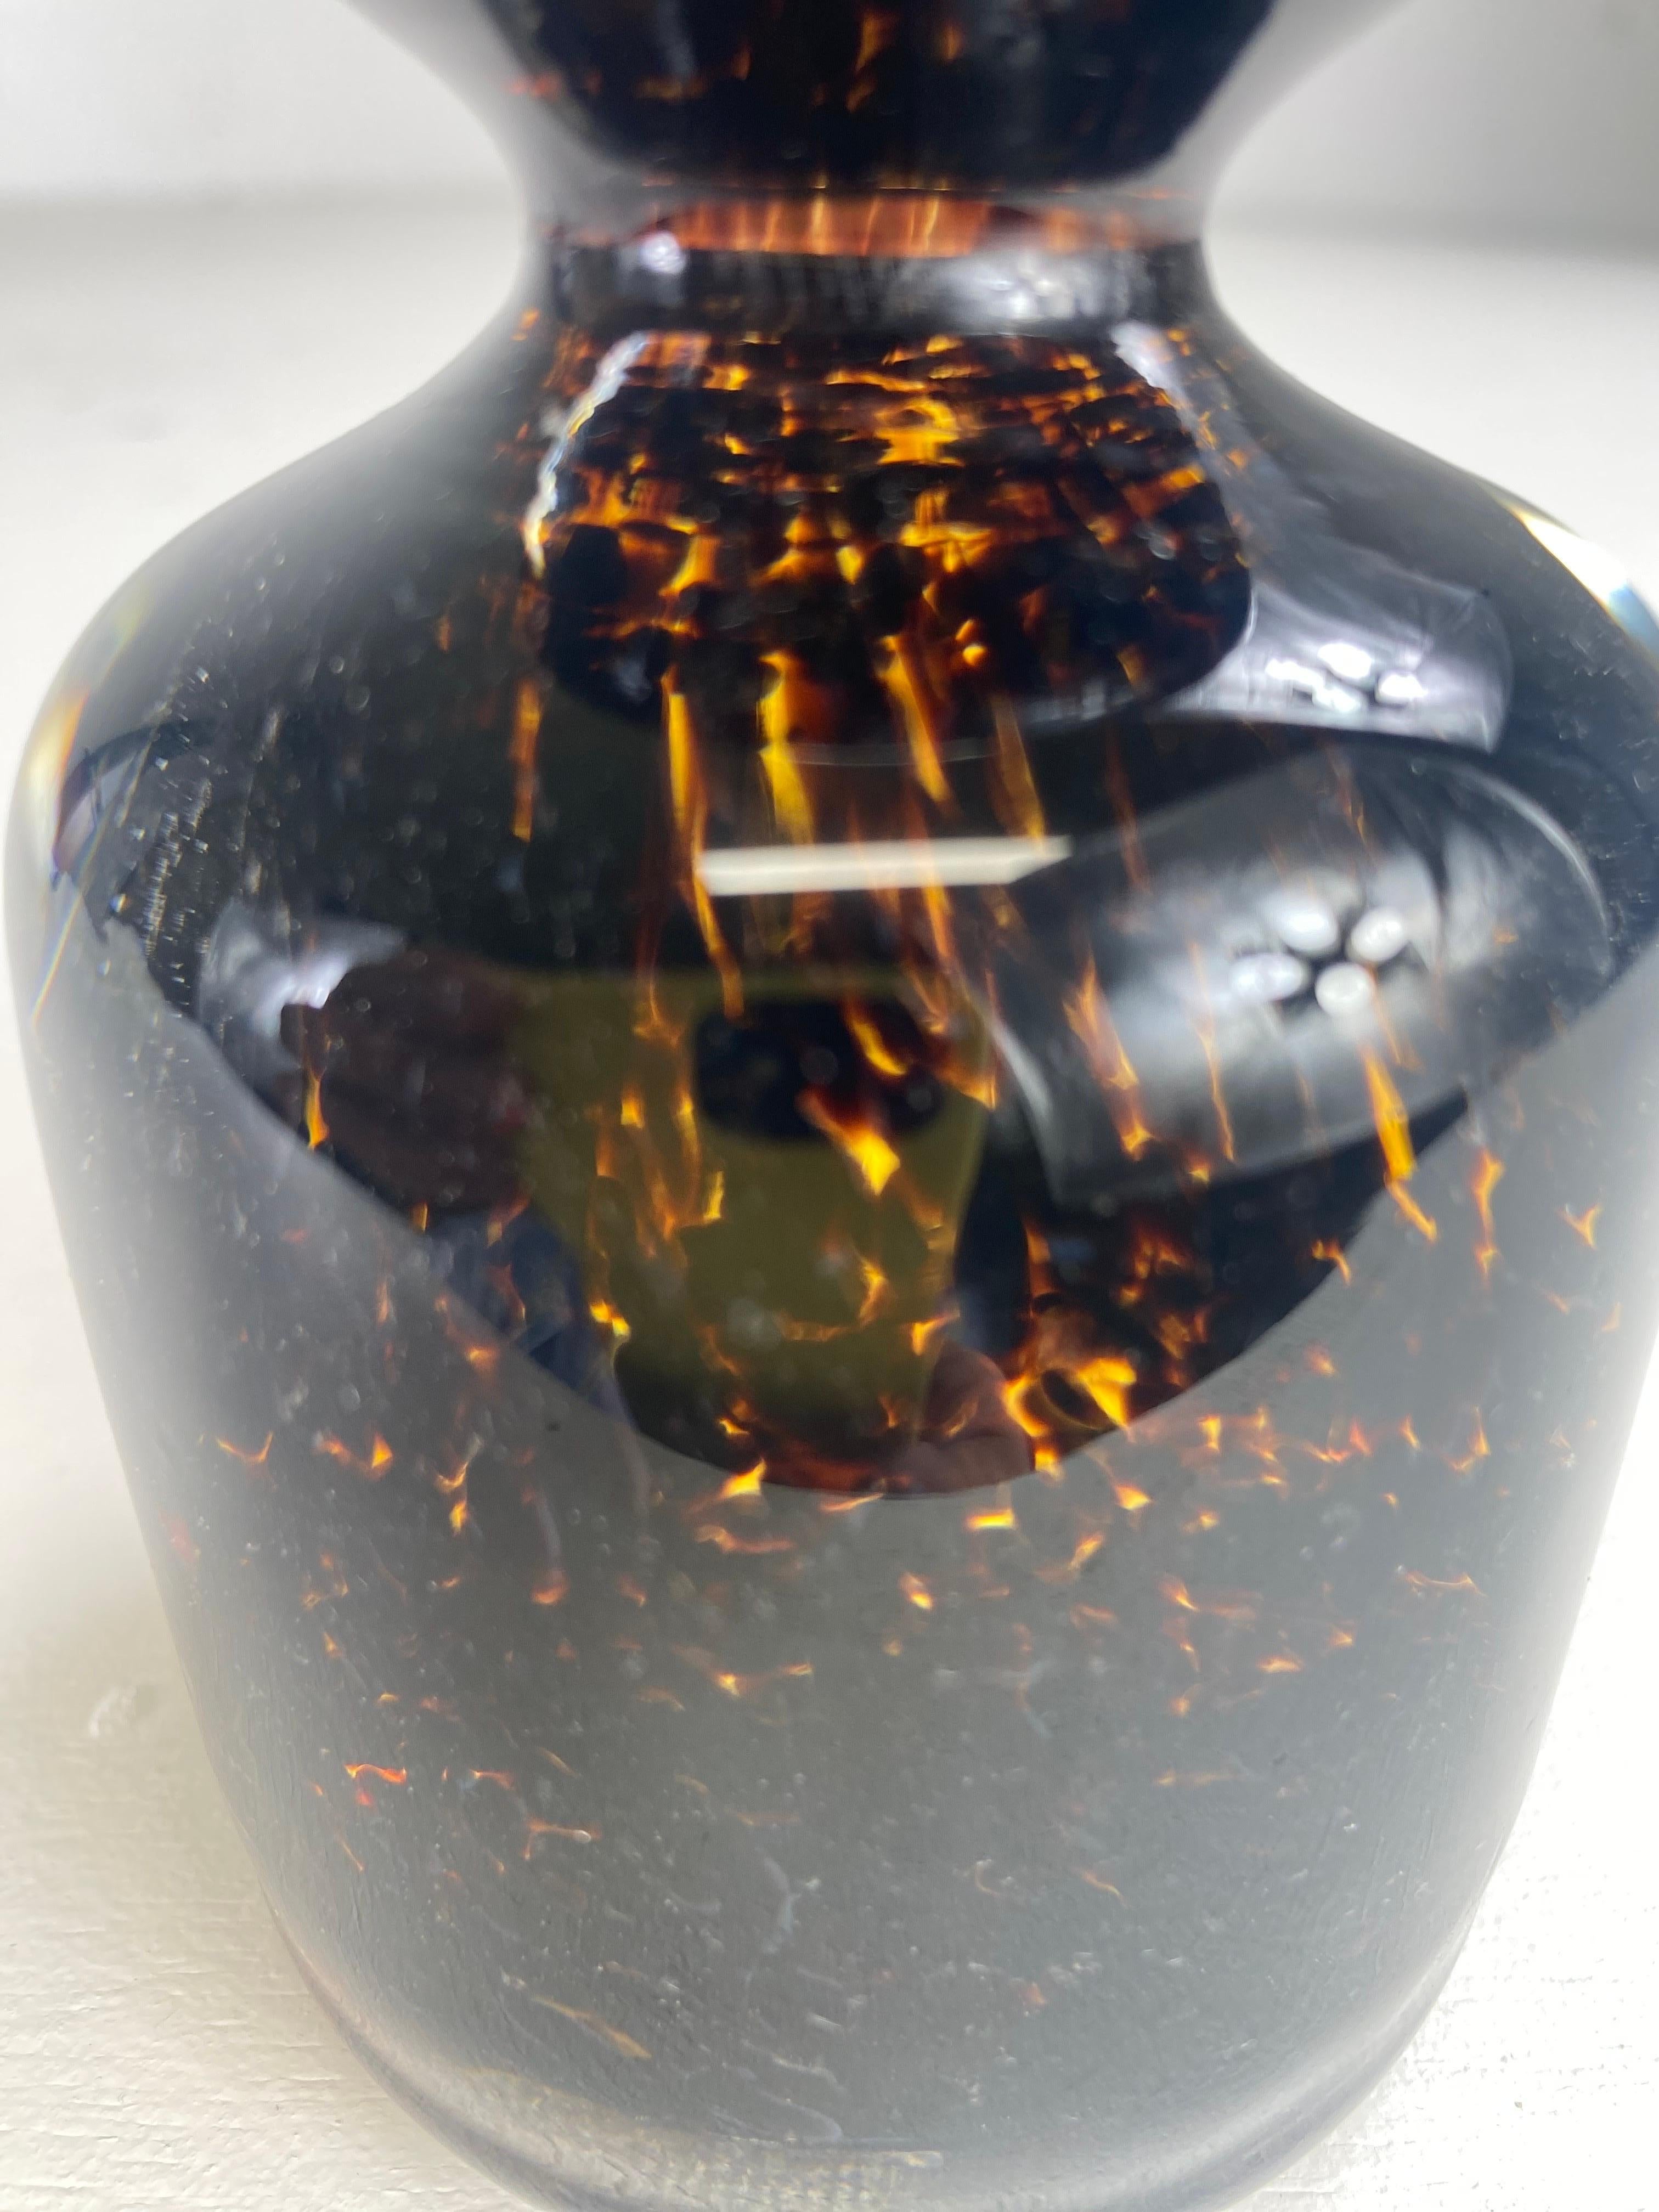 This is a mid century vintage handblown glass Murano paperweight. This paperweight has a unique design in that the interior of the glass looks like tortoiseshell with beautiful tones of dark brown, Amber and gold. This vintage paperweight has his